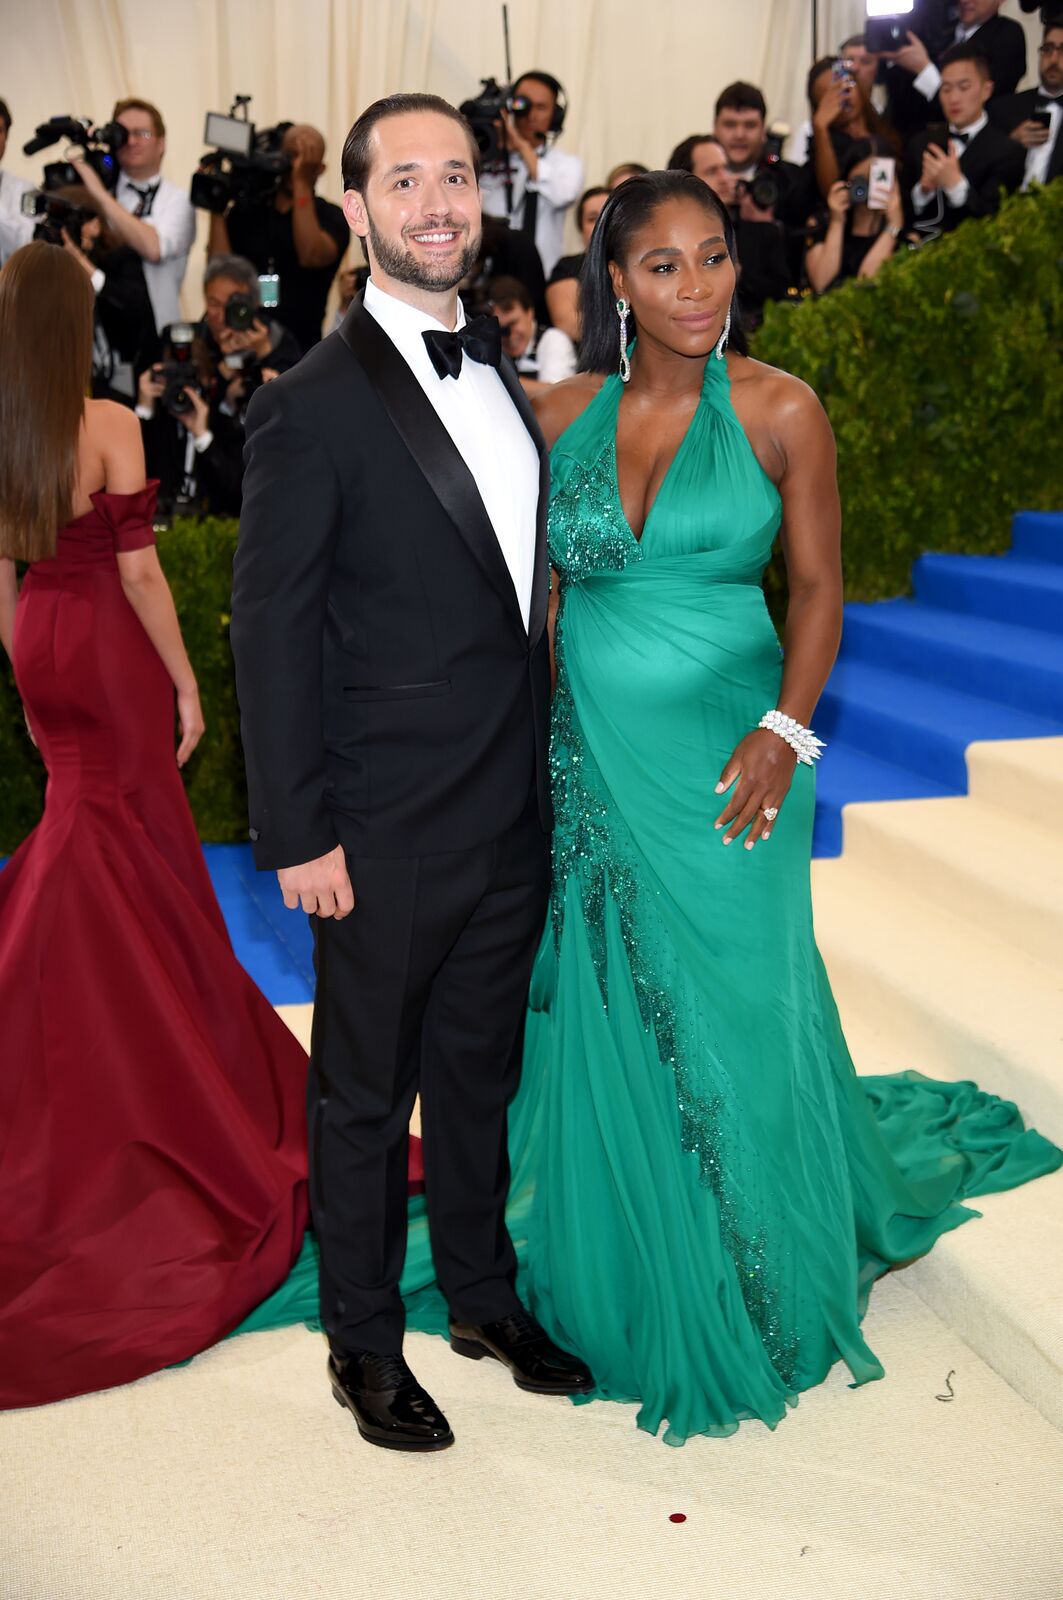 Alexis Ohanian and Serena Williams attend the Costume Institute Gala at Metropolitan Museum of Art on May 1, 2017. | Source: Getty Images